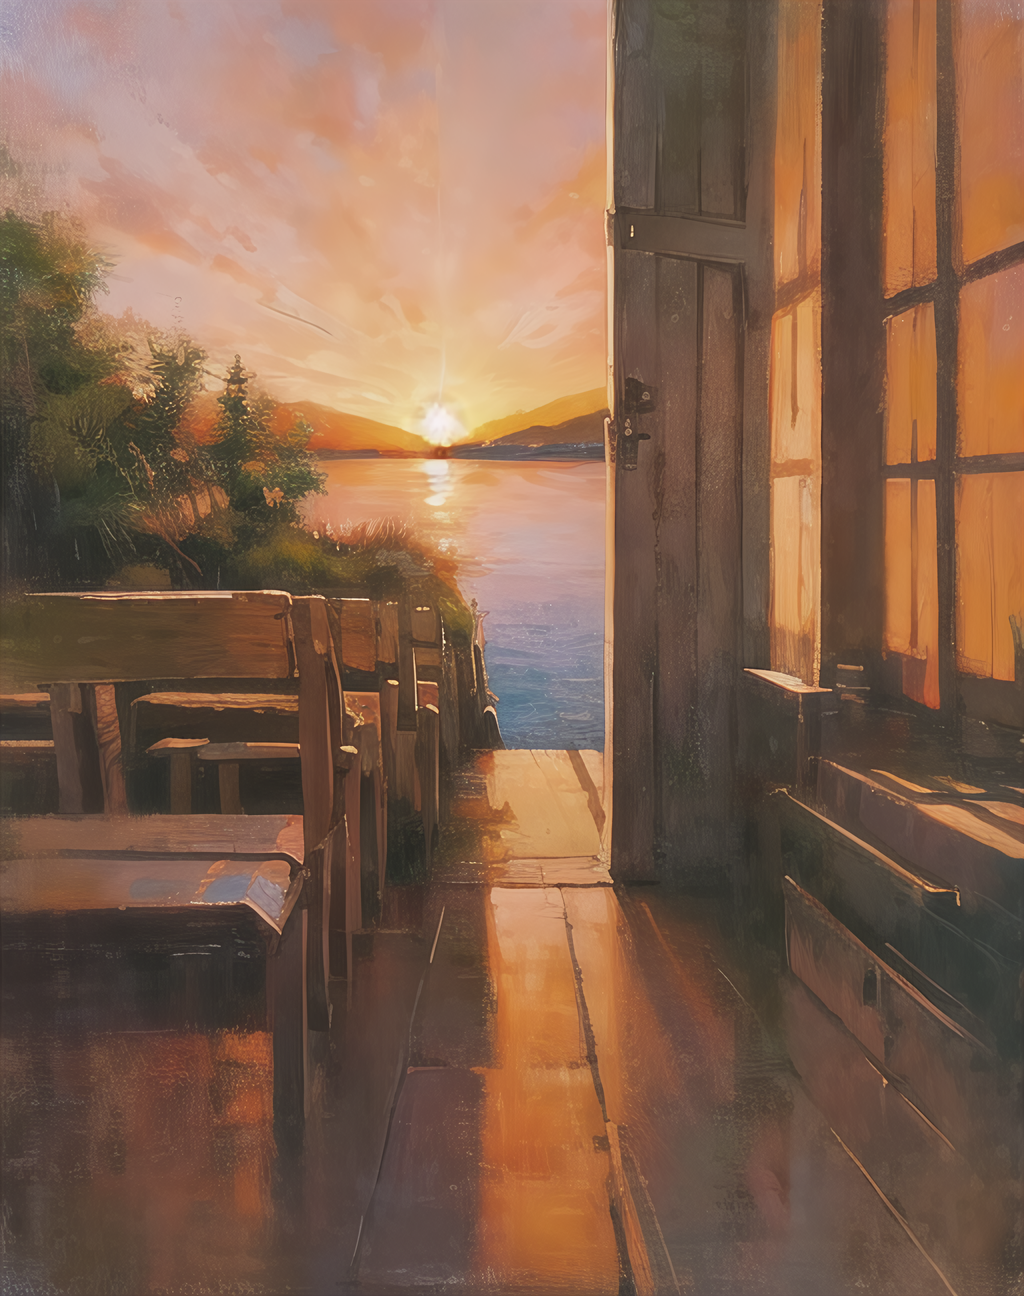 A Cafe near Lake in sunset near a forest in risikesh